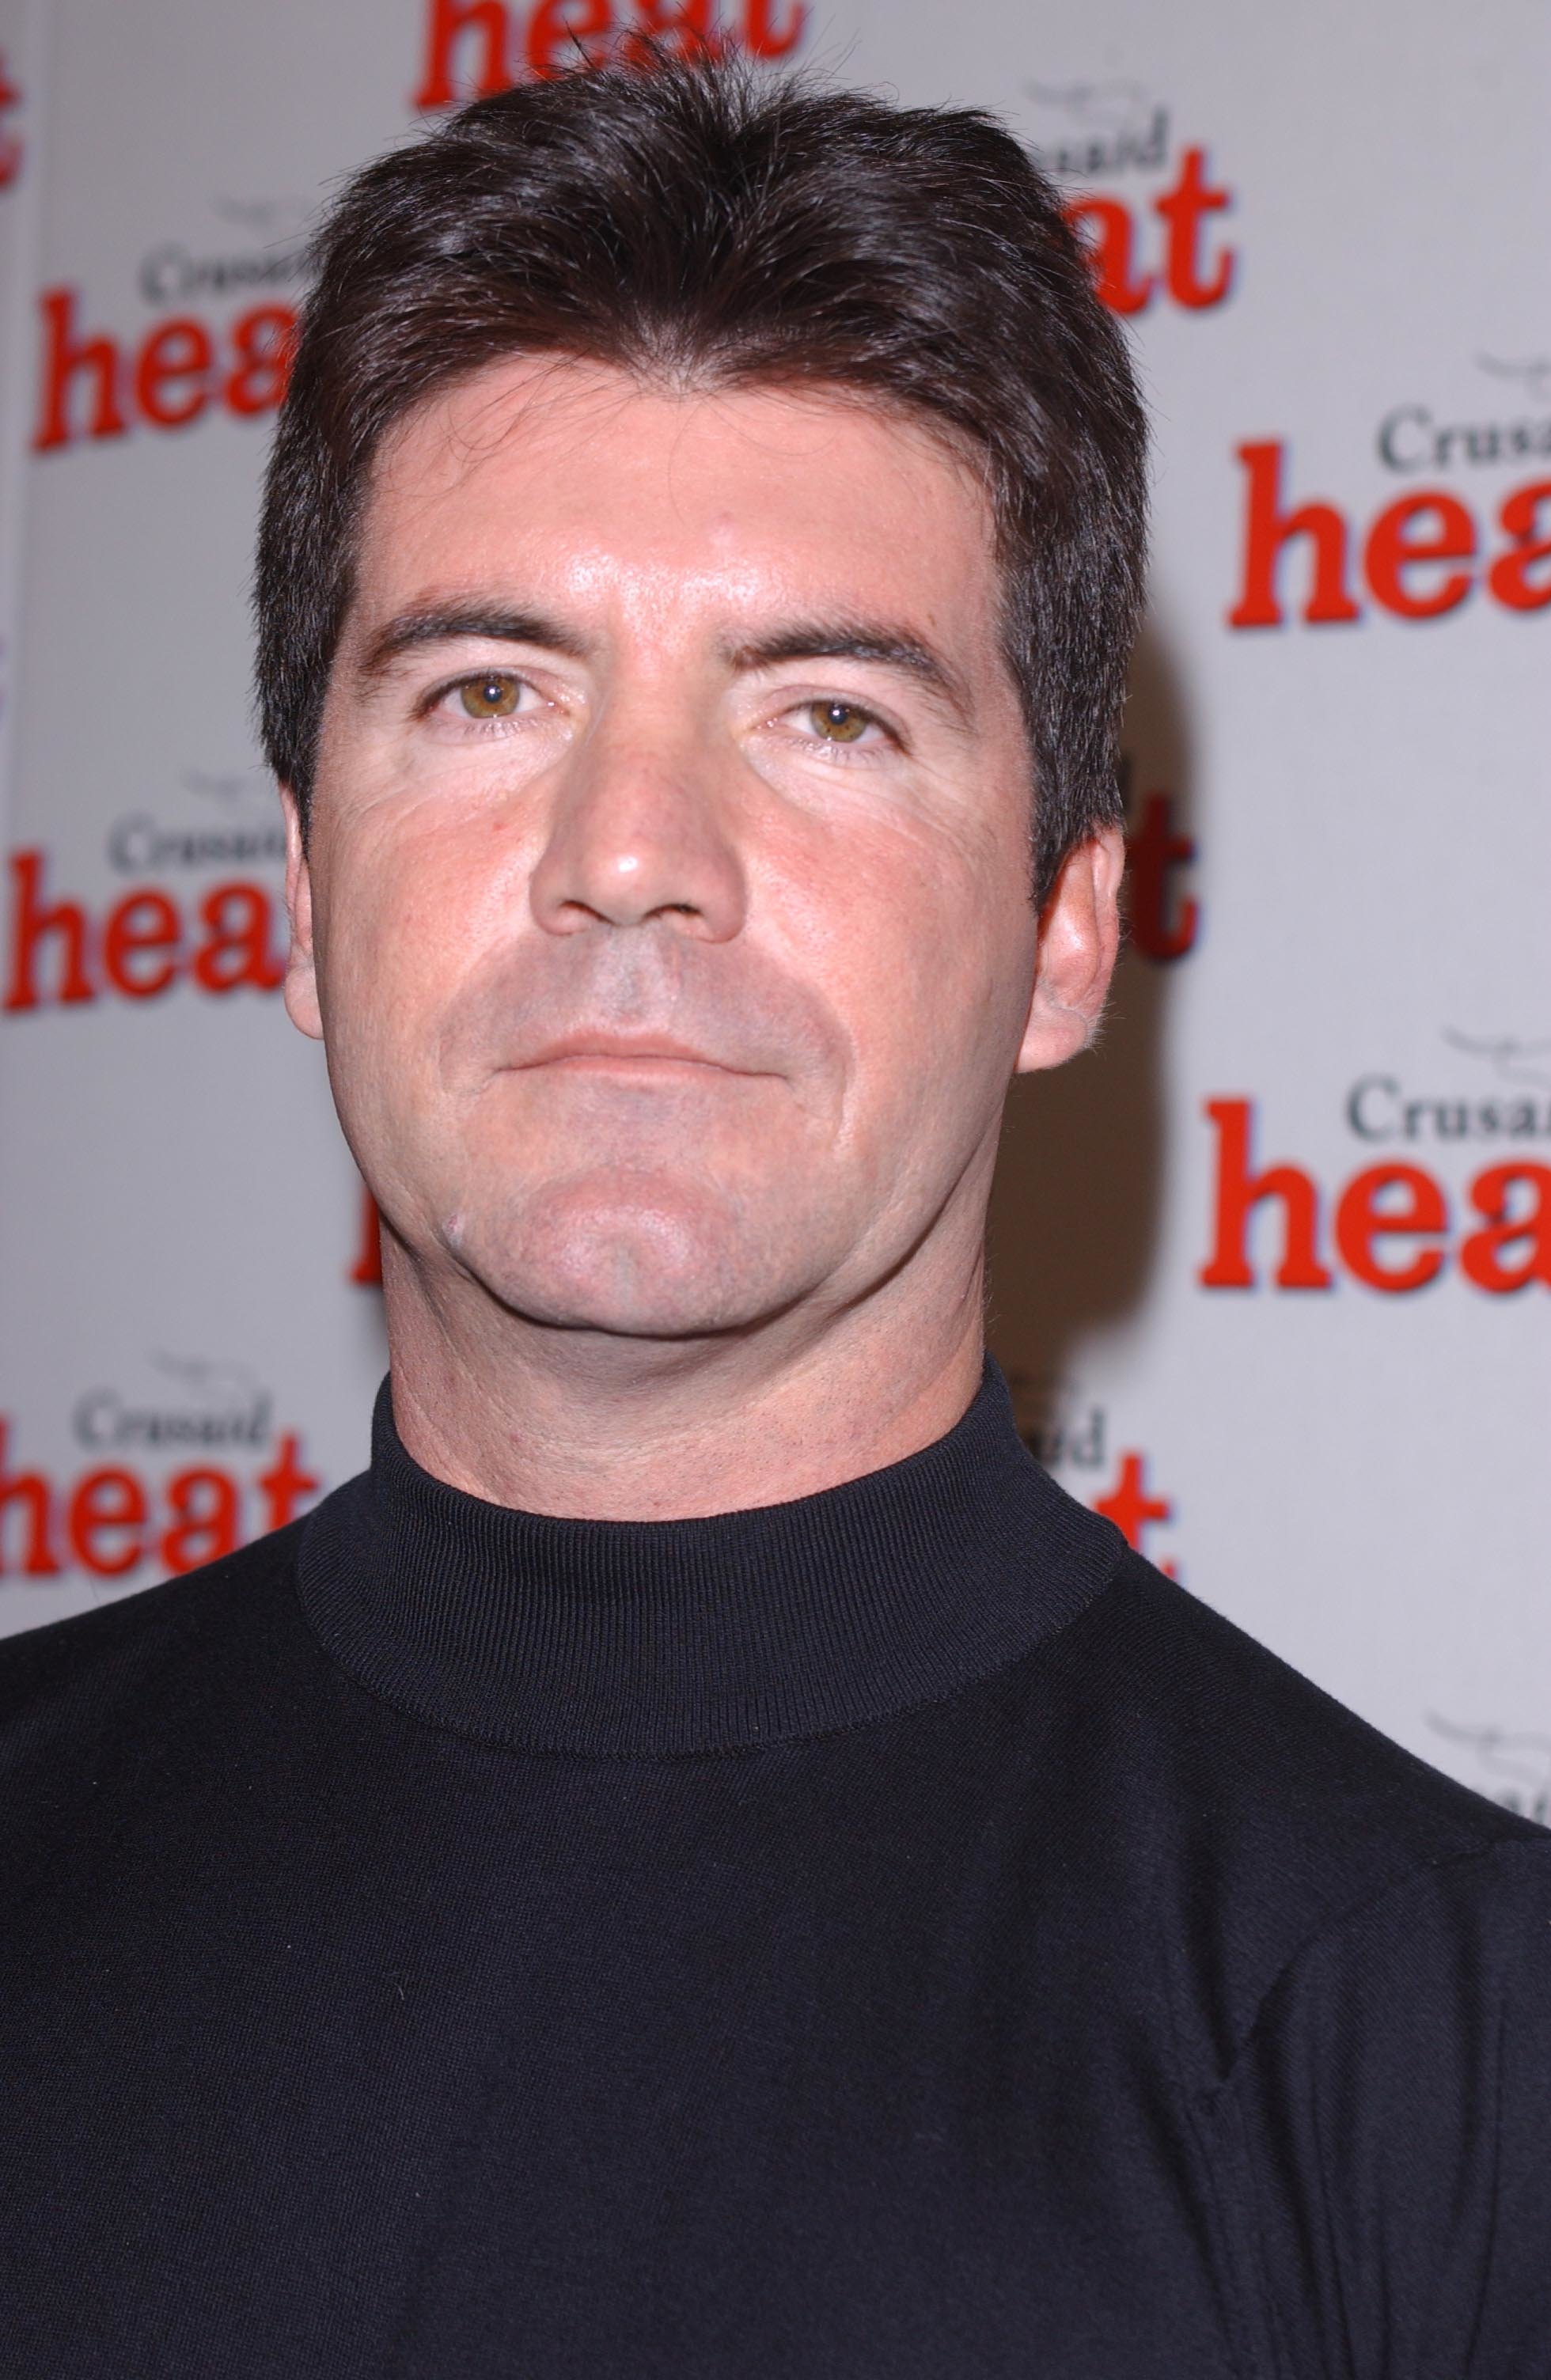 Simon Cowell attends the Heat magazine celebrity auction in London in 2002. | Source: Getty Images